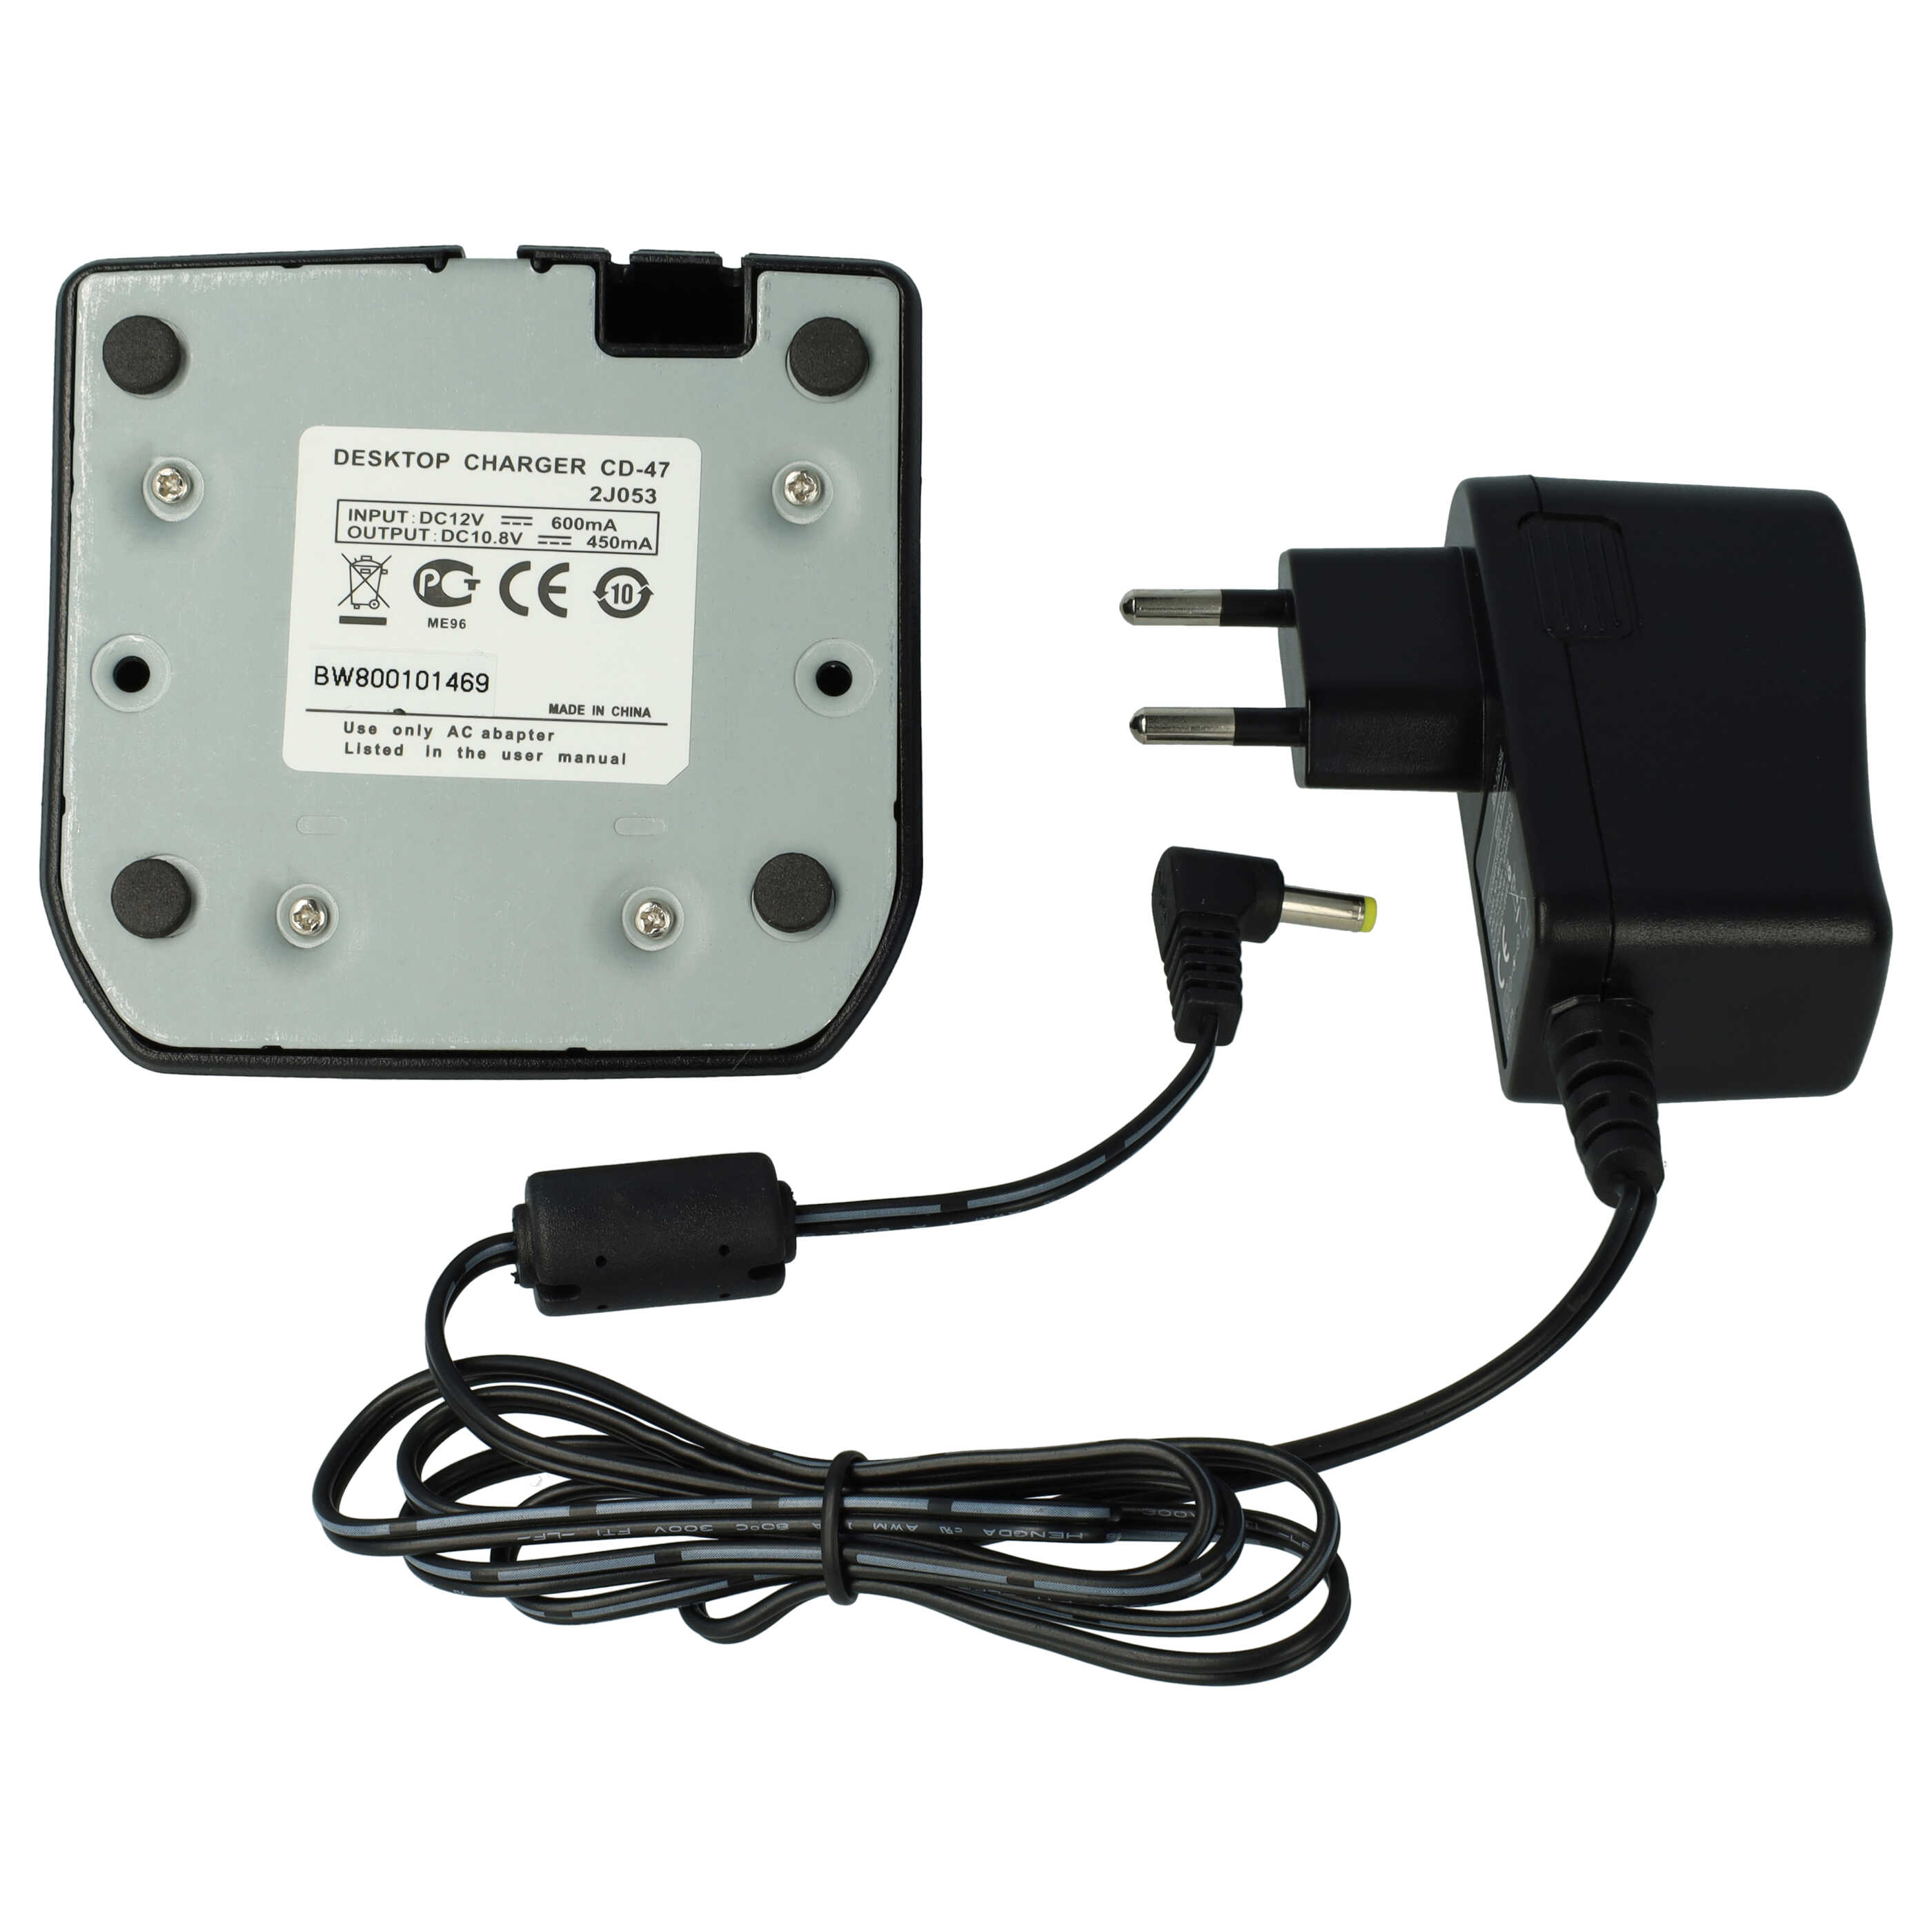 Charger + Mains Adapter Suitable for Yaesu FNB-83 Radio Batteries - 10.8 V, 0.45 A